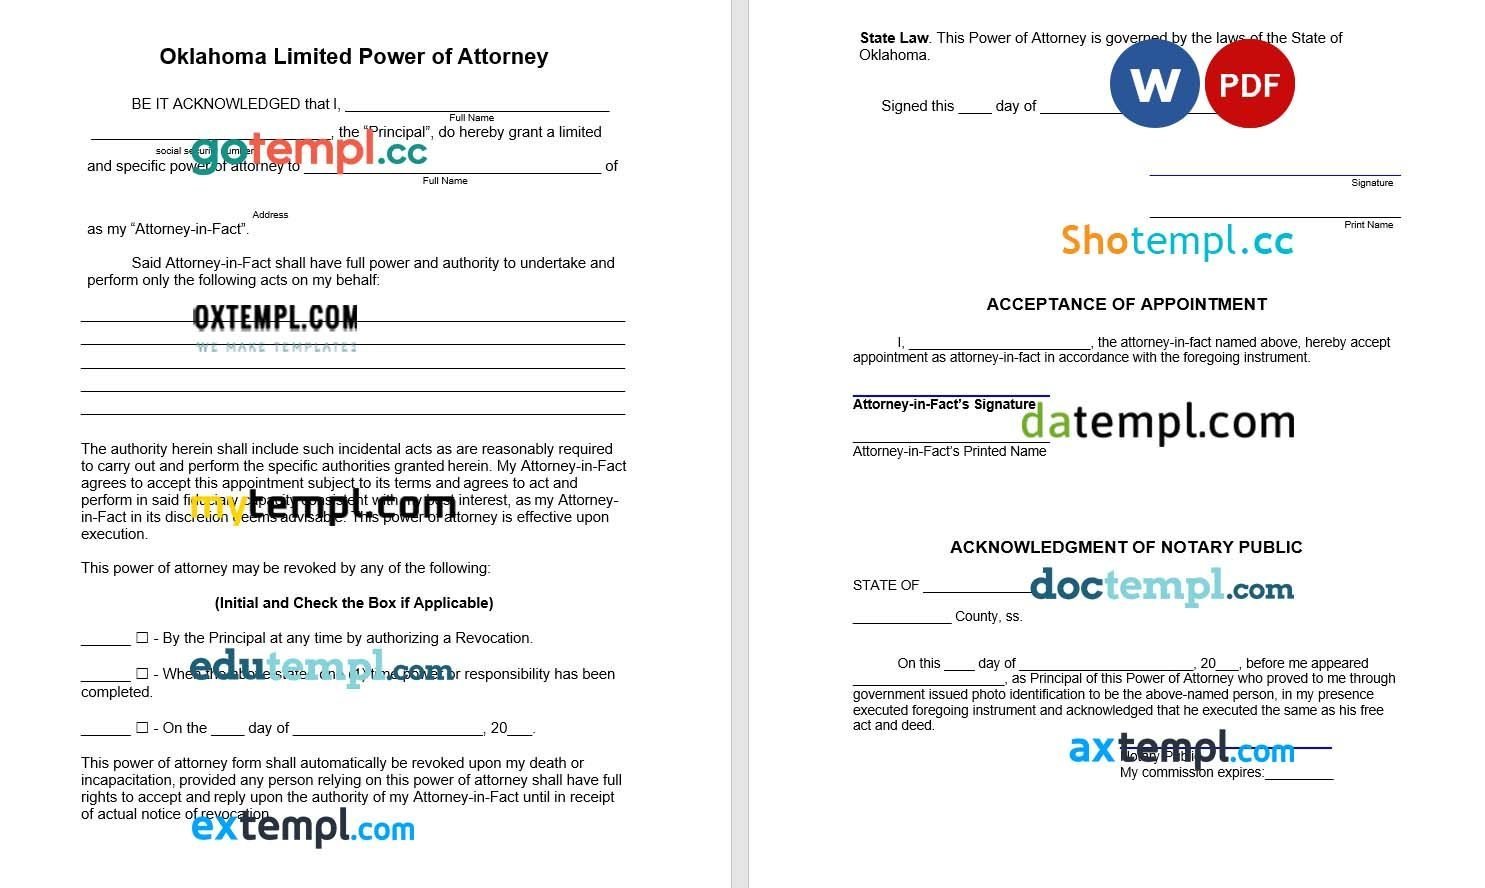 Oklahoma Limited Power of Attorney Form example, fully editable